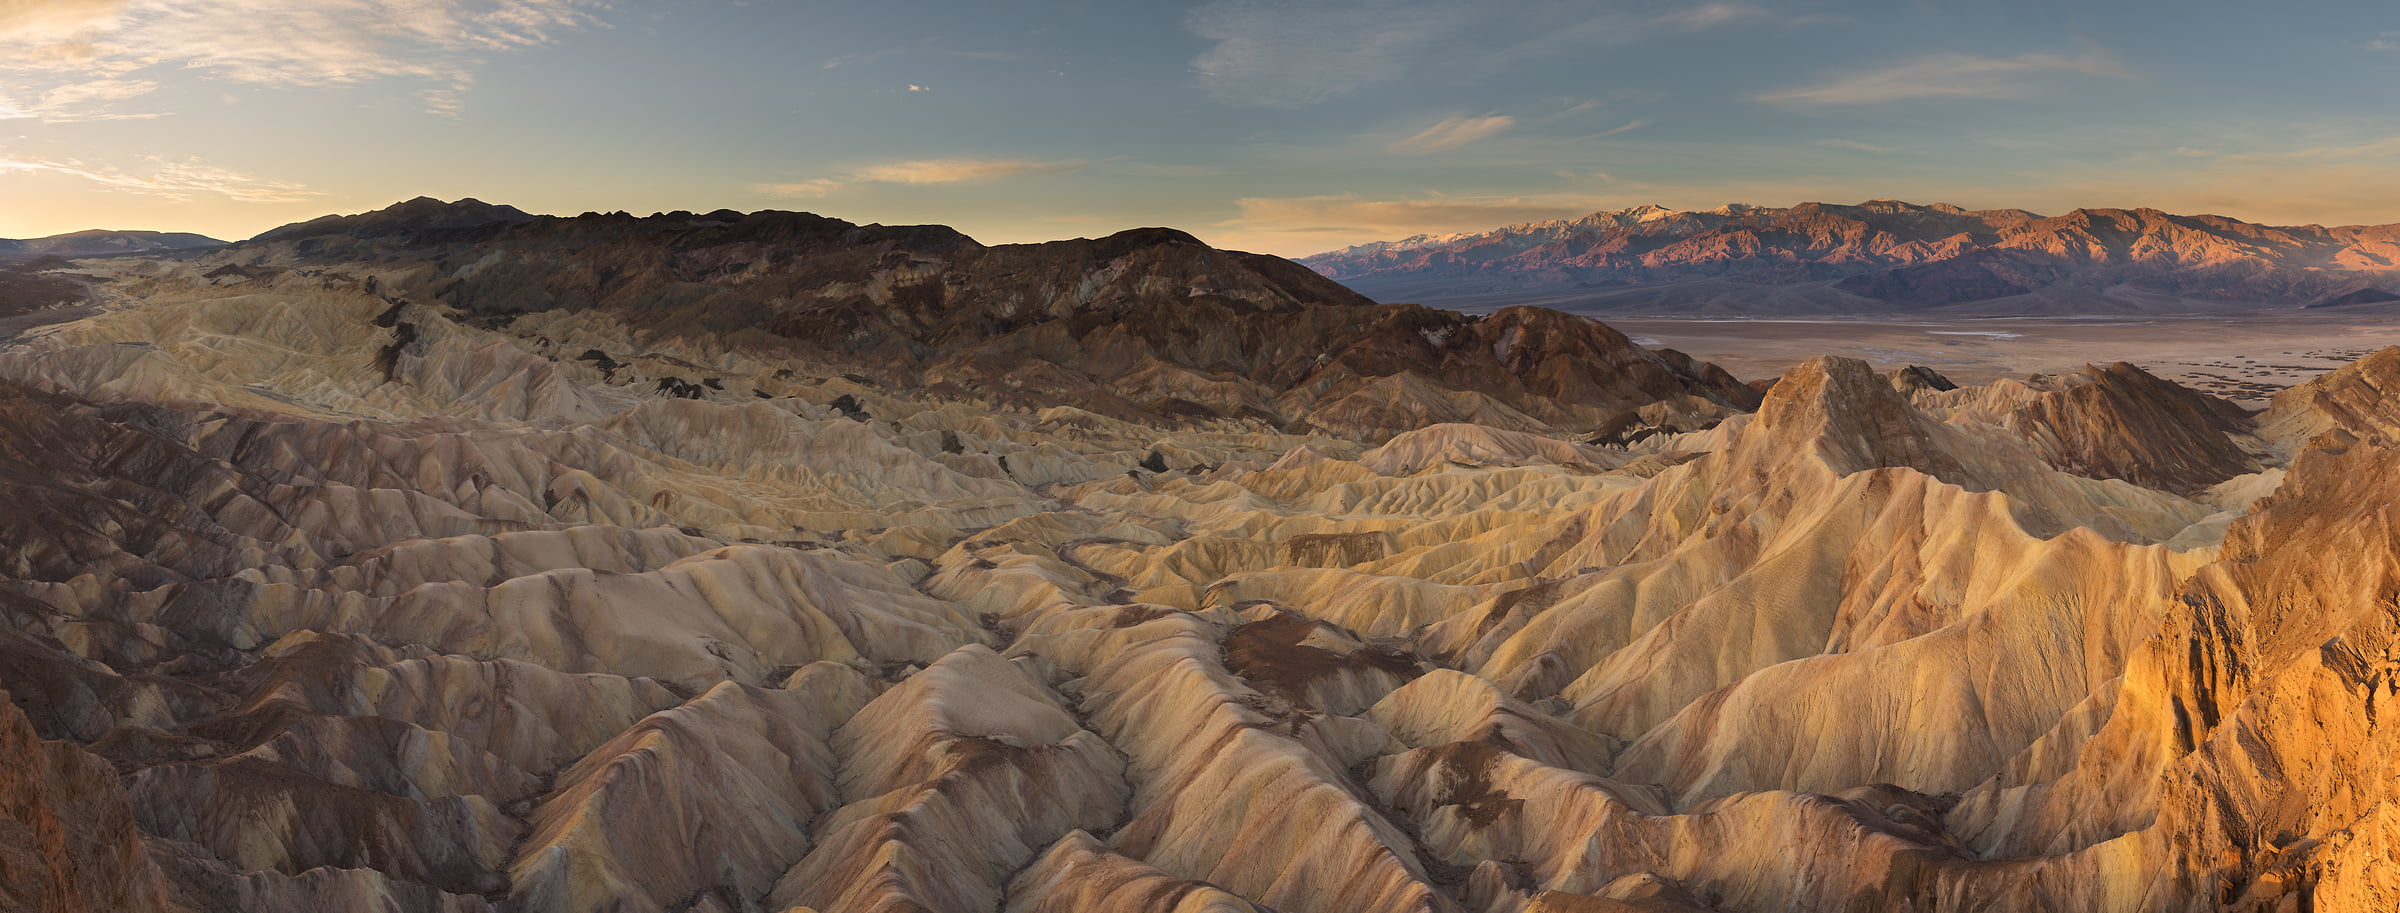 1,245 megapixels! A very high resolution, large-format VAST photo print of Death Valley from Zabriskie Point; fine art landscape photo created by Guido Brandt in Death Valley National Park, California.